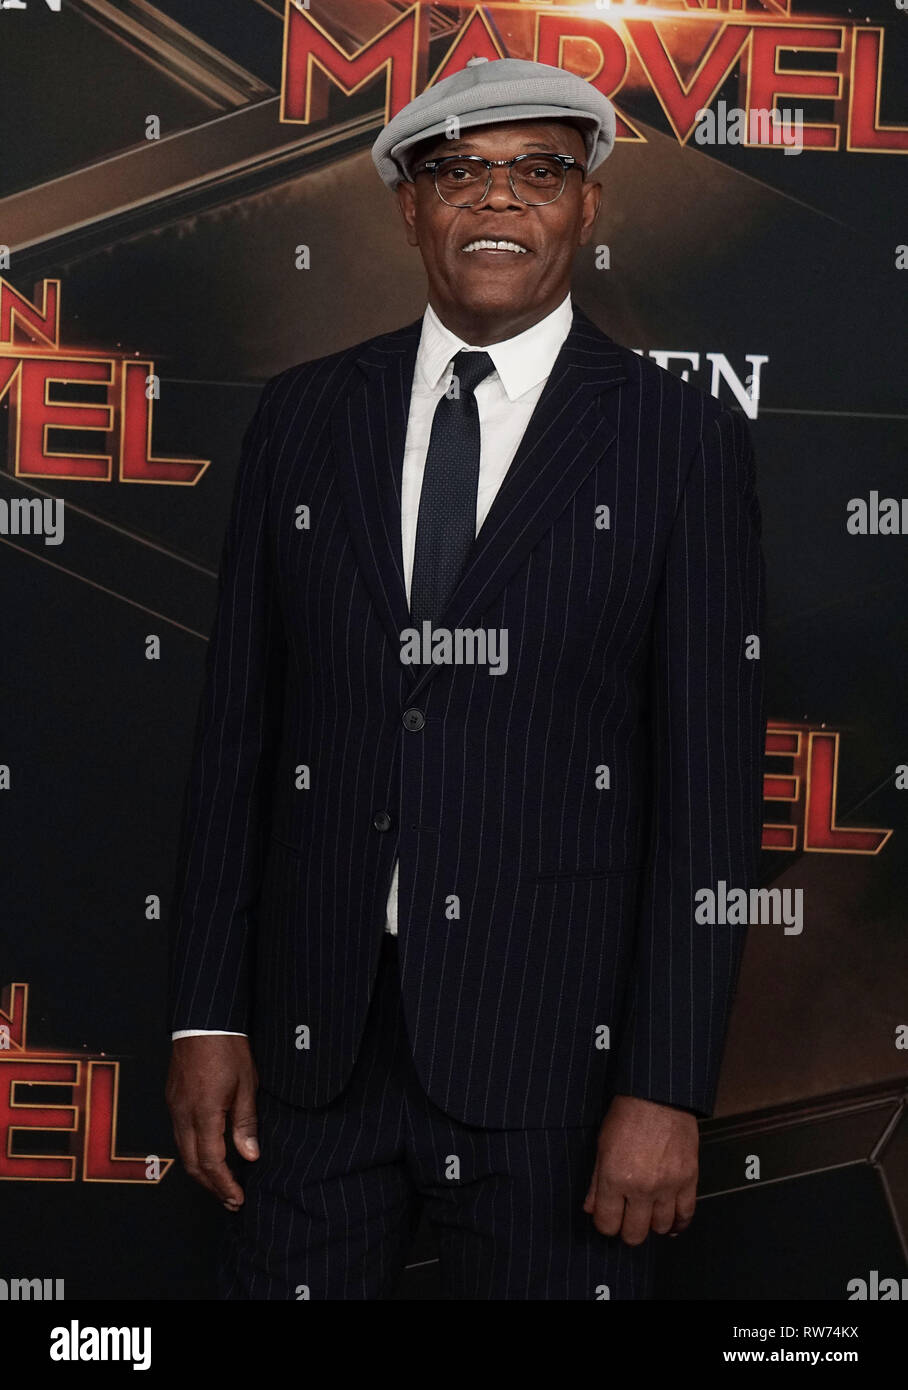 Los Angeles, USA. 04th Mar, 2019. Samuel L Jackson attends the Marvel Studios 'Captain Marvel' premiere on March 04, 2019 in Hollywood, California. Credit: Tsuni/USA/Alamy Live News Stock Photo